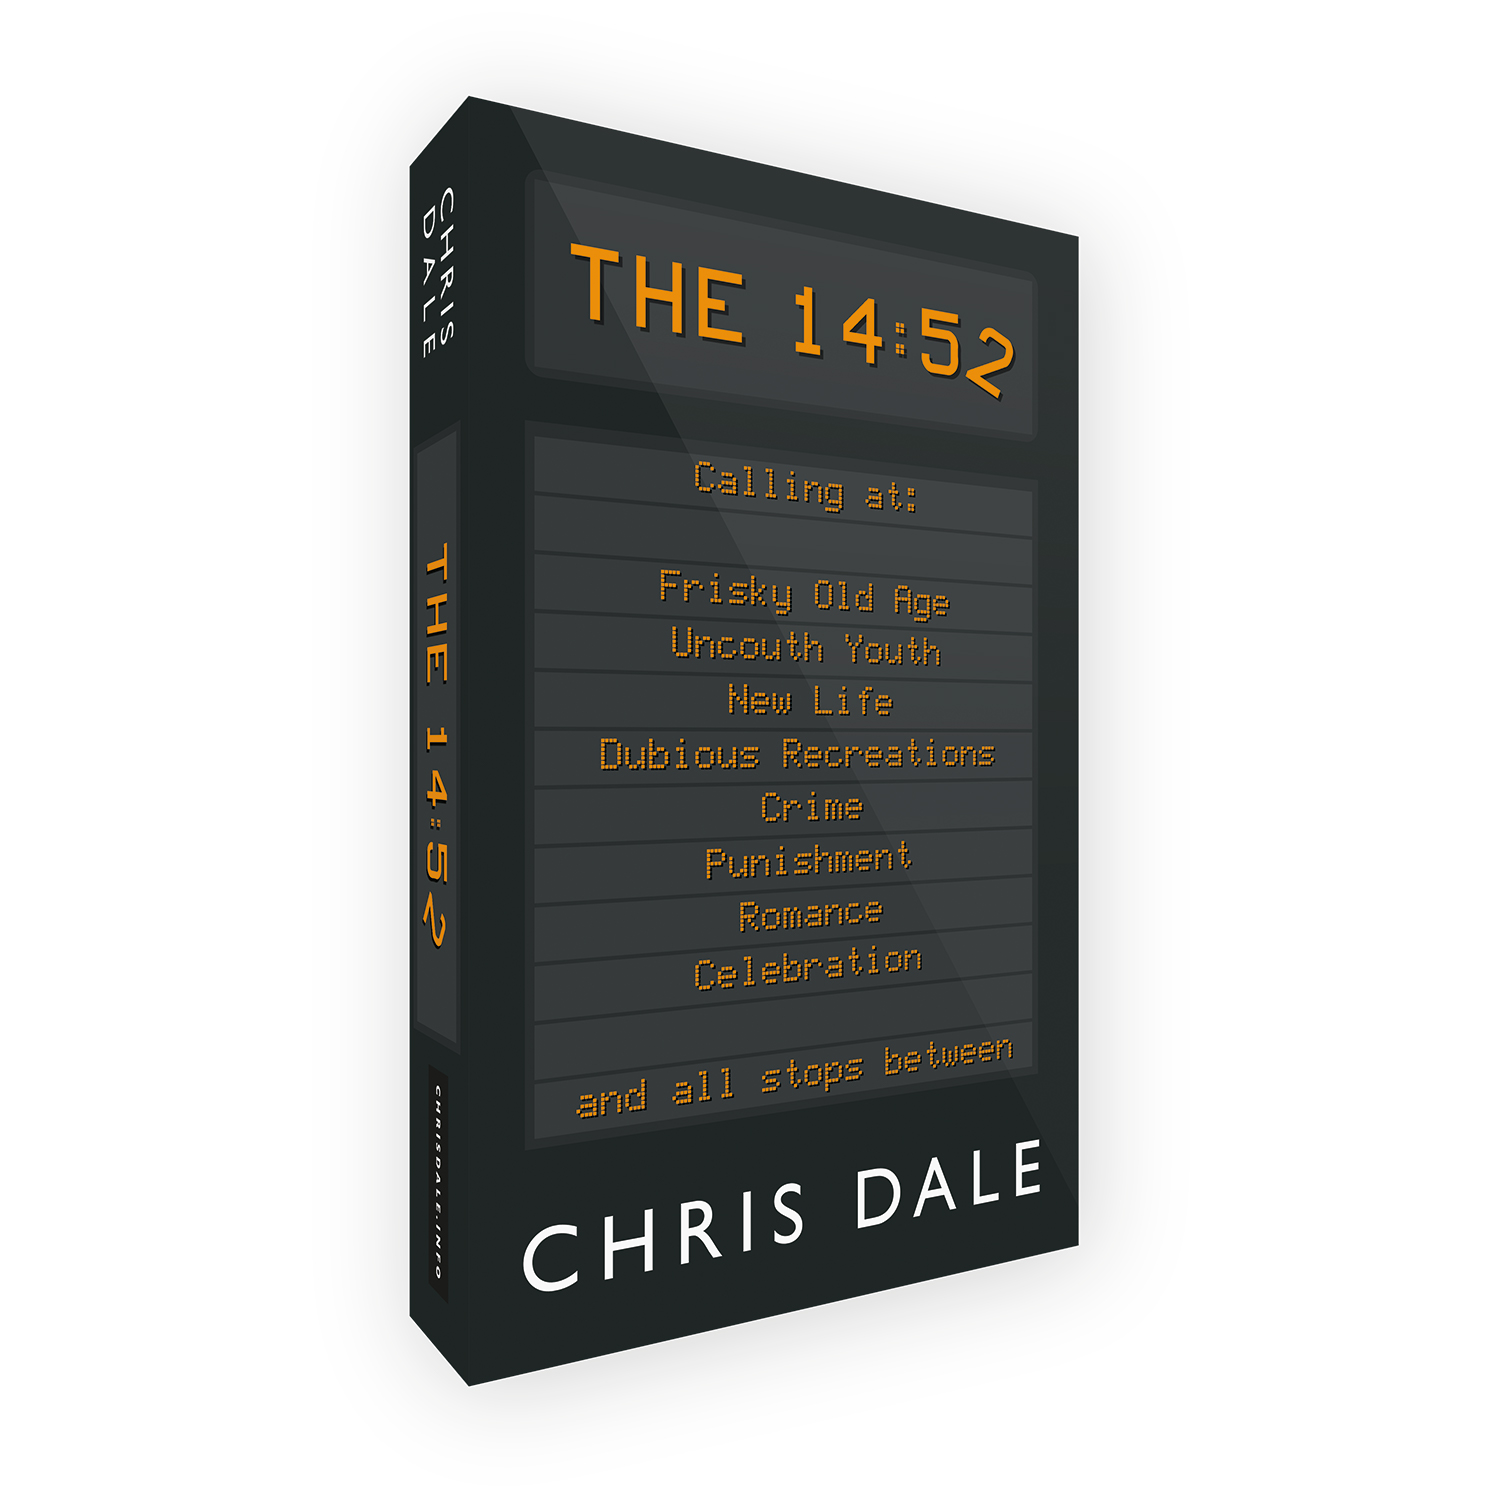 'The 14:52' is a bespoke cover design for dramedy novel, by the author Chris Dale.. The book cover was designed by Mark Thomas, of coverness.com. To find out more about my book design services, please visit www.coverness.com.